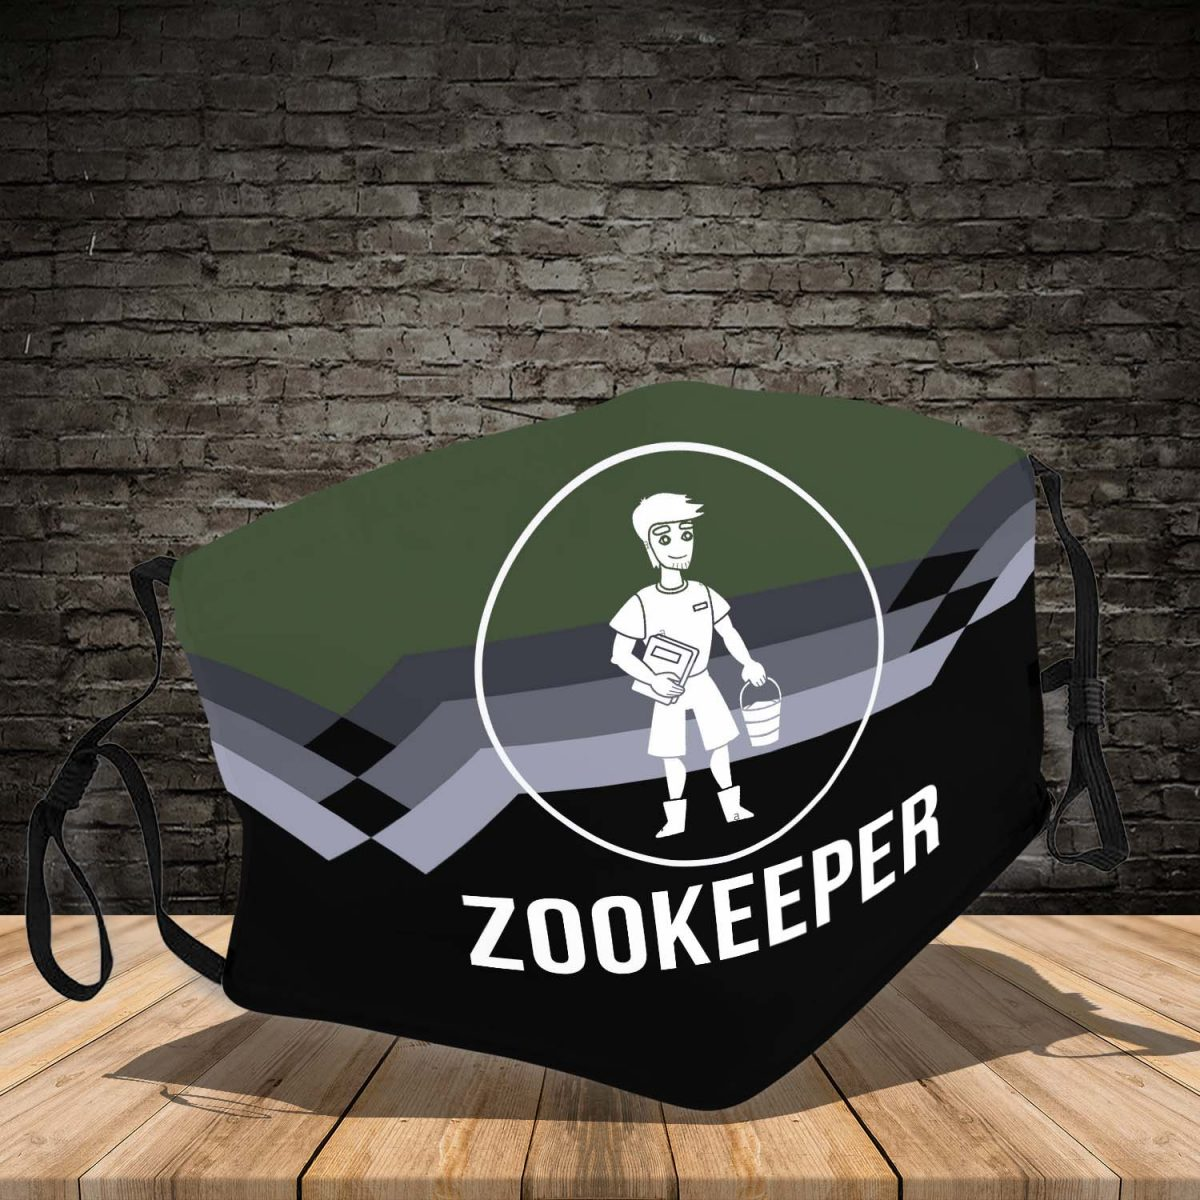 Zookeeper 3d face mask